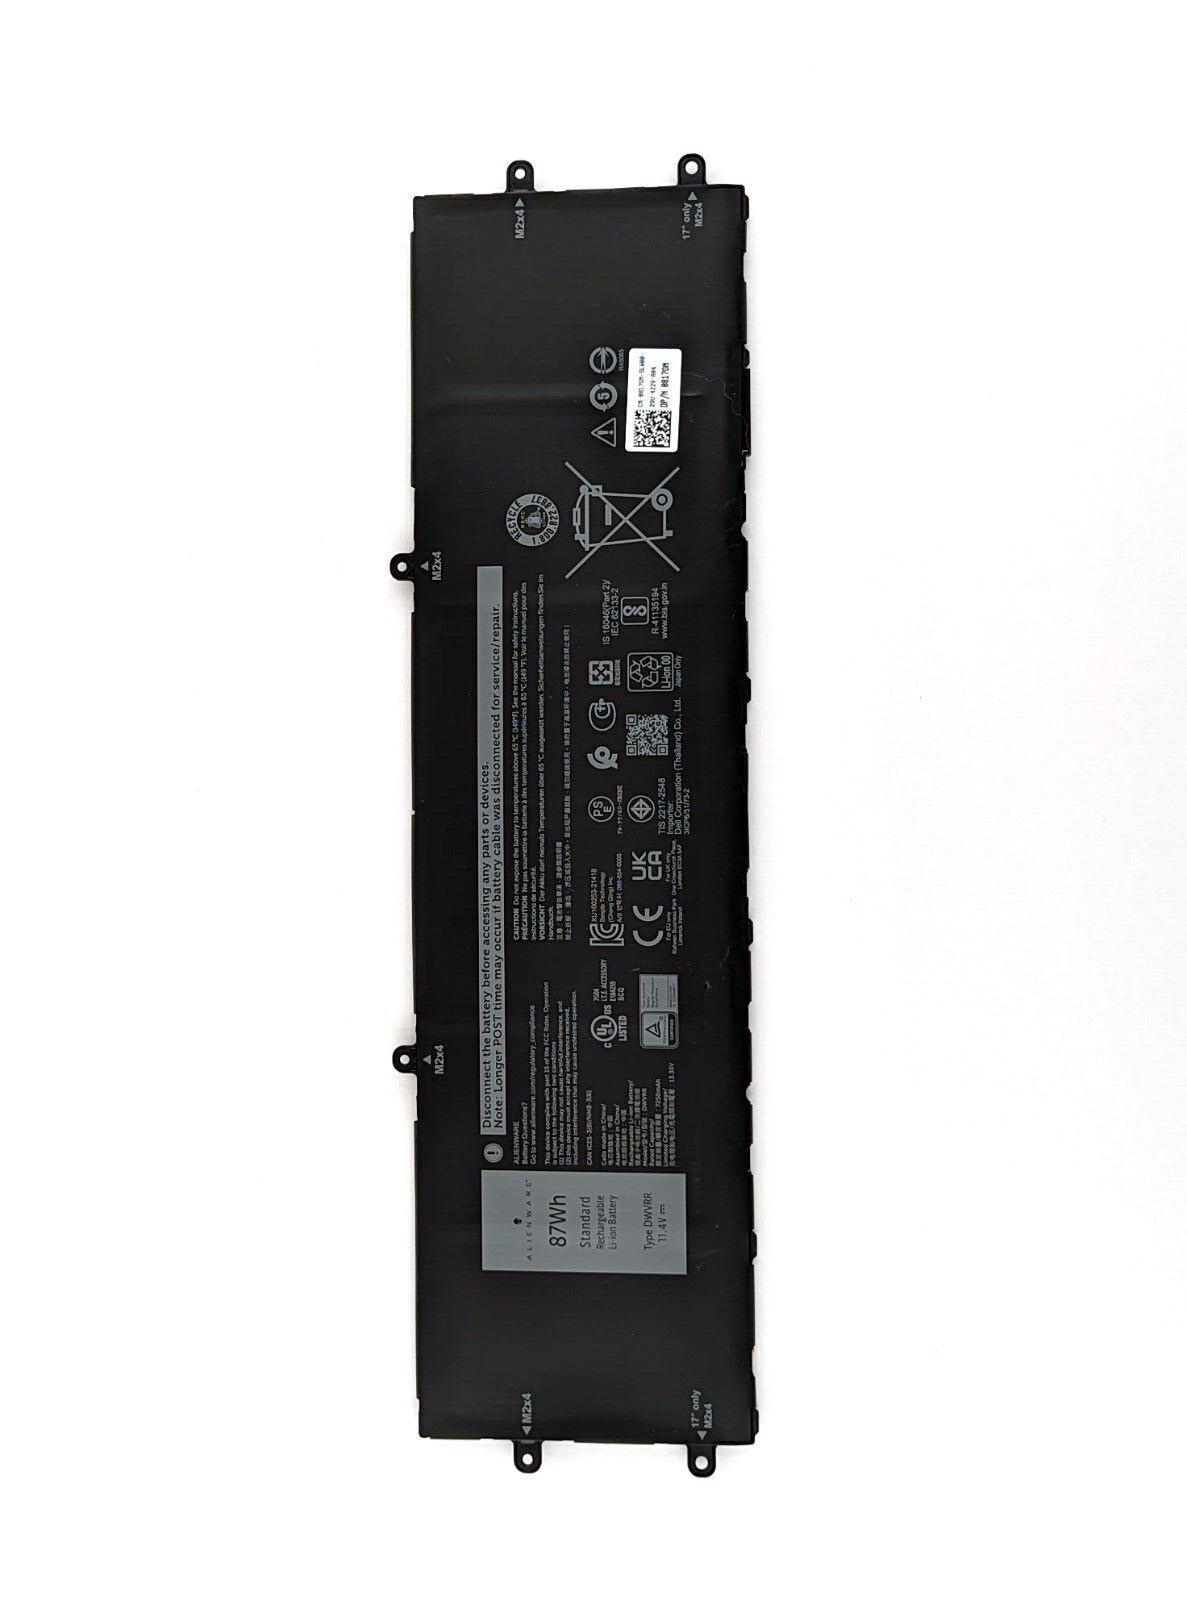 NEW GENUINE Alienware X17 R1 R2 X15 R1 R2 7620 6 Cell 87Wh Battery  - DWVRR